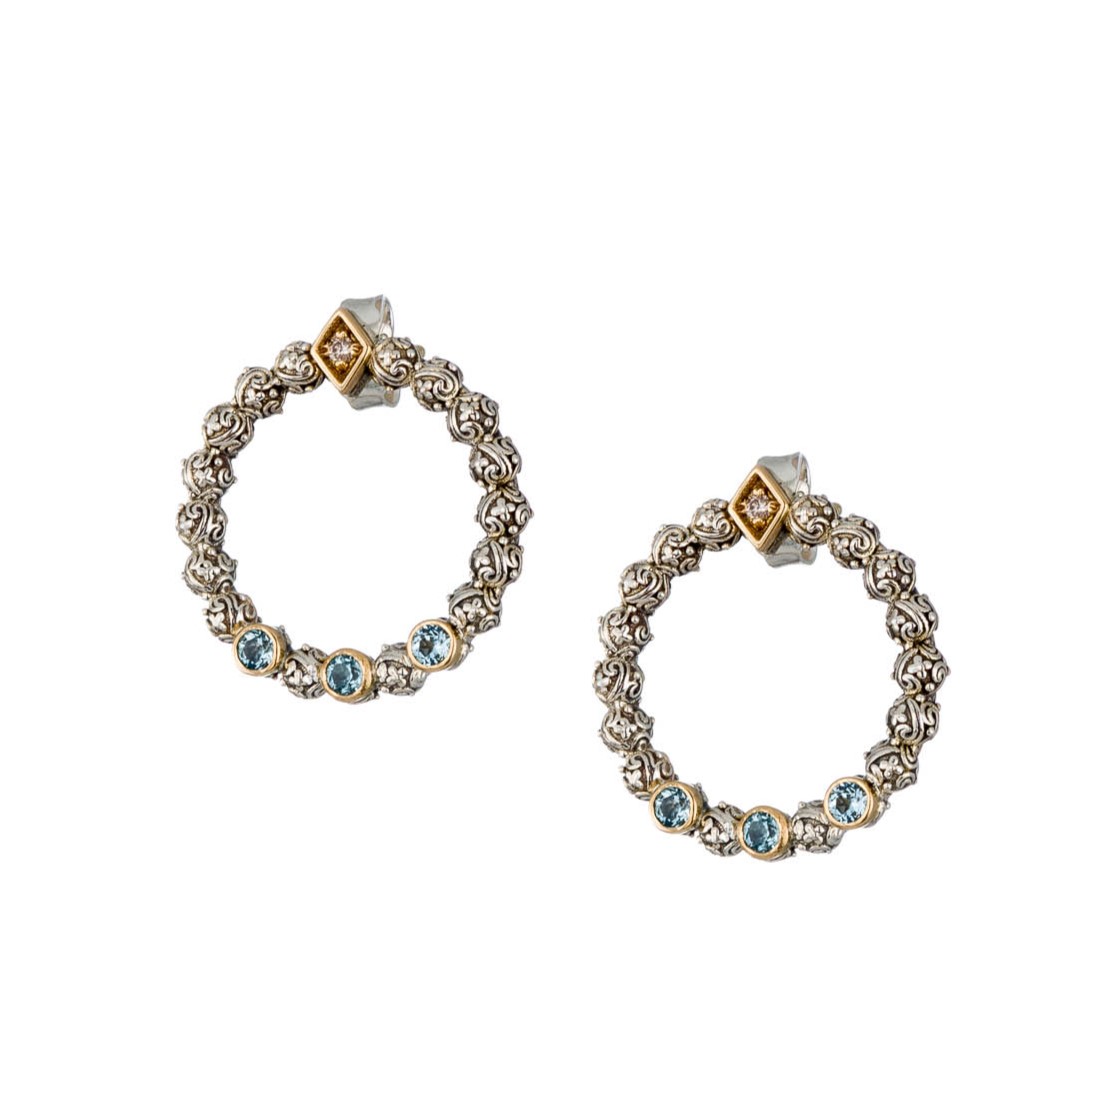 Eve stud circle earrings in 18K Gold and sterling silver with Gemstones